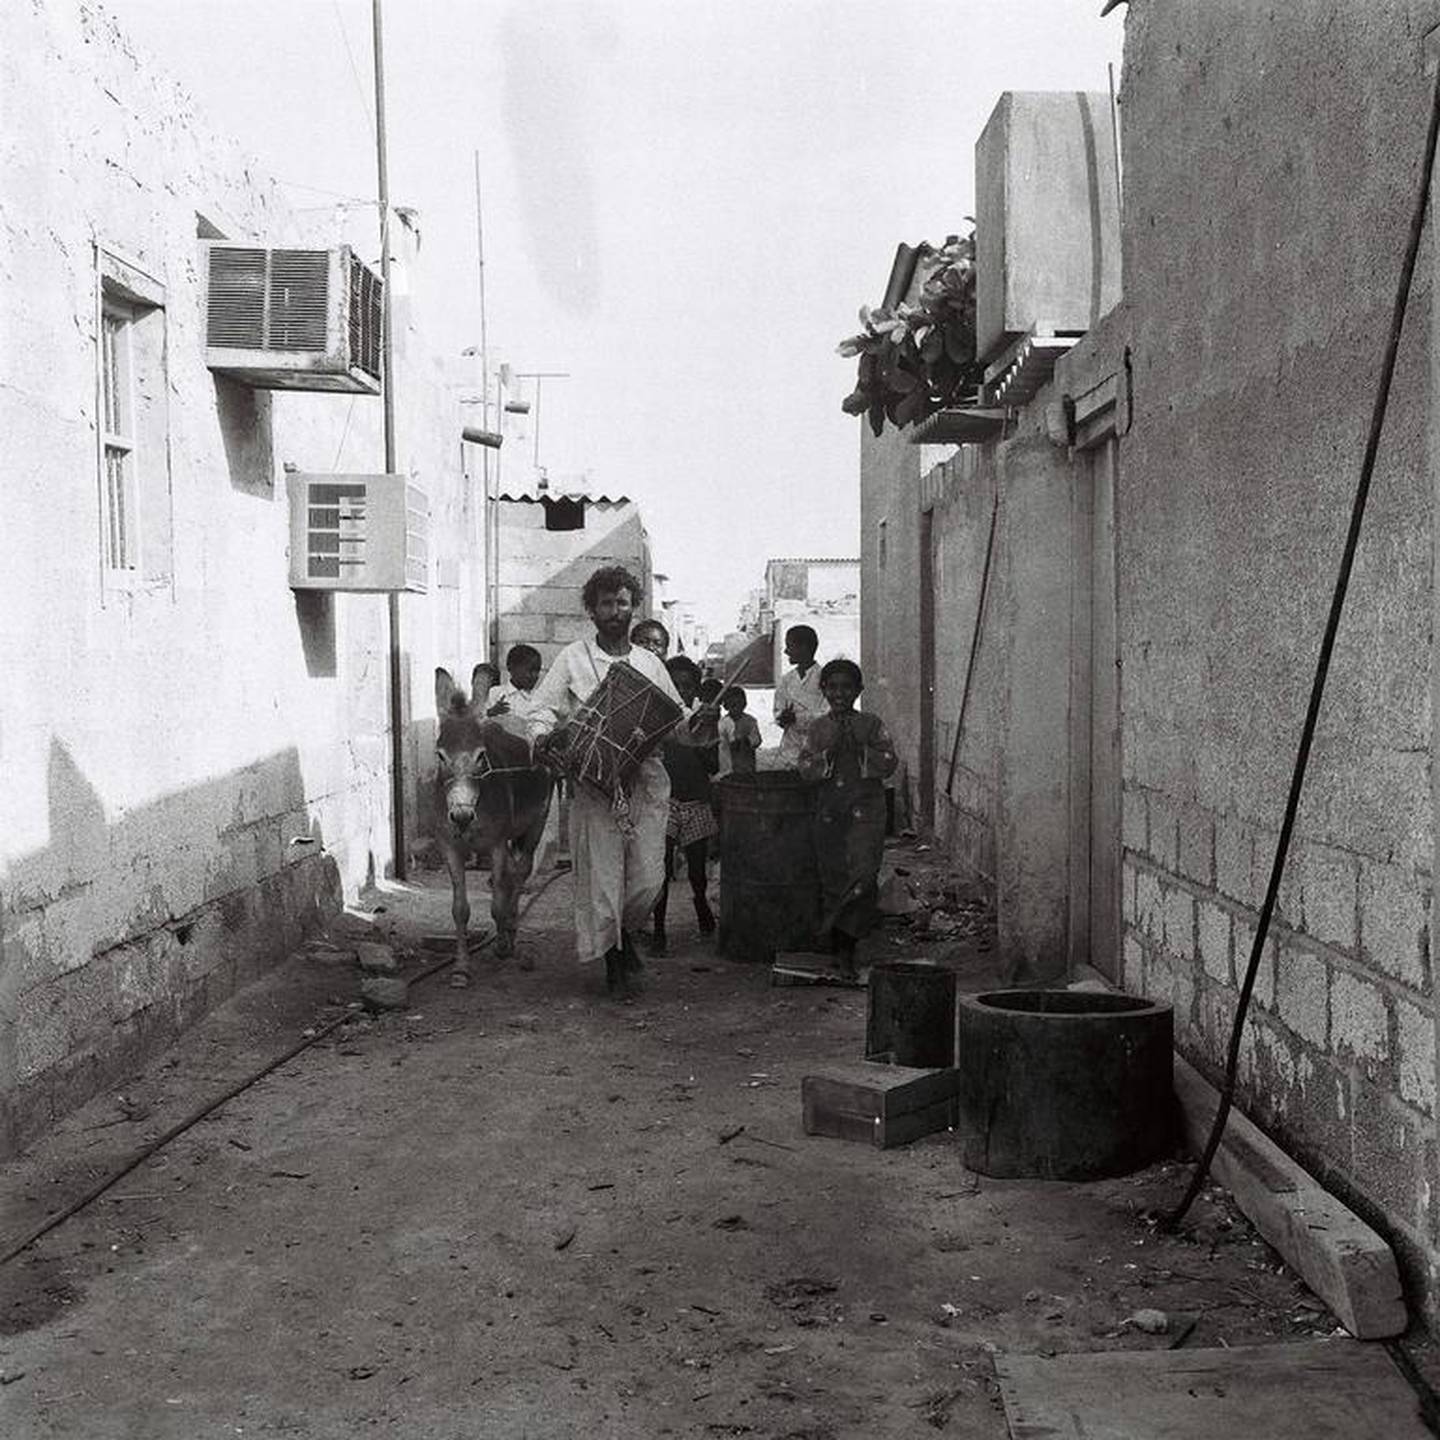 Drummer Khamees Abu Tubaila and his entourage walk the alleyways of Abu Dhabi to wake people and prepare them for the day’s fasting. Courtesy Alettihad